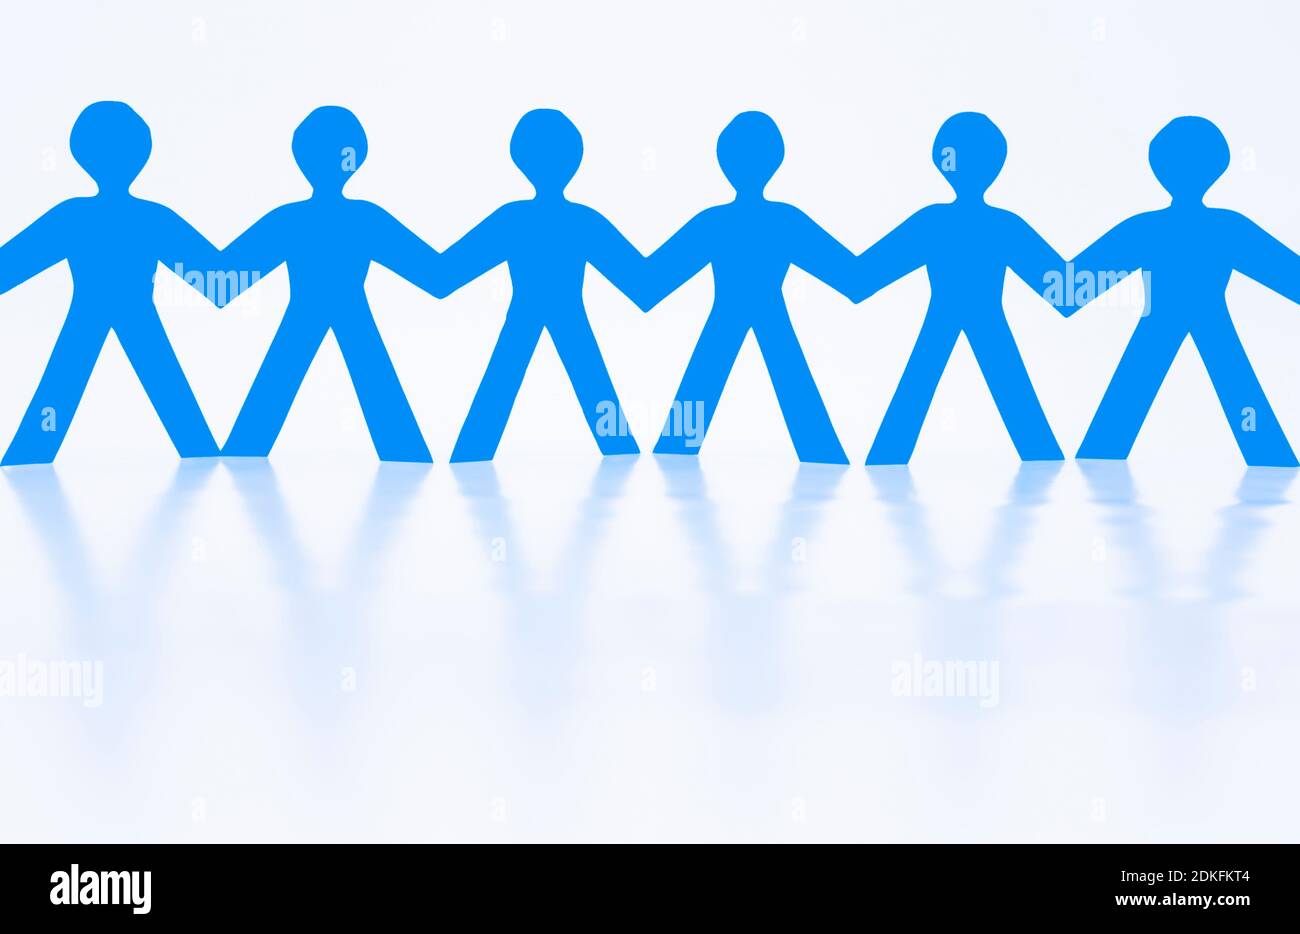 Paper man as a human chain against a white background Stock Photo - Alamy